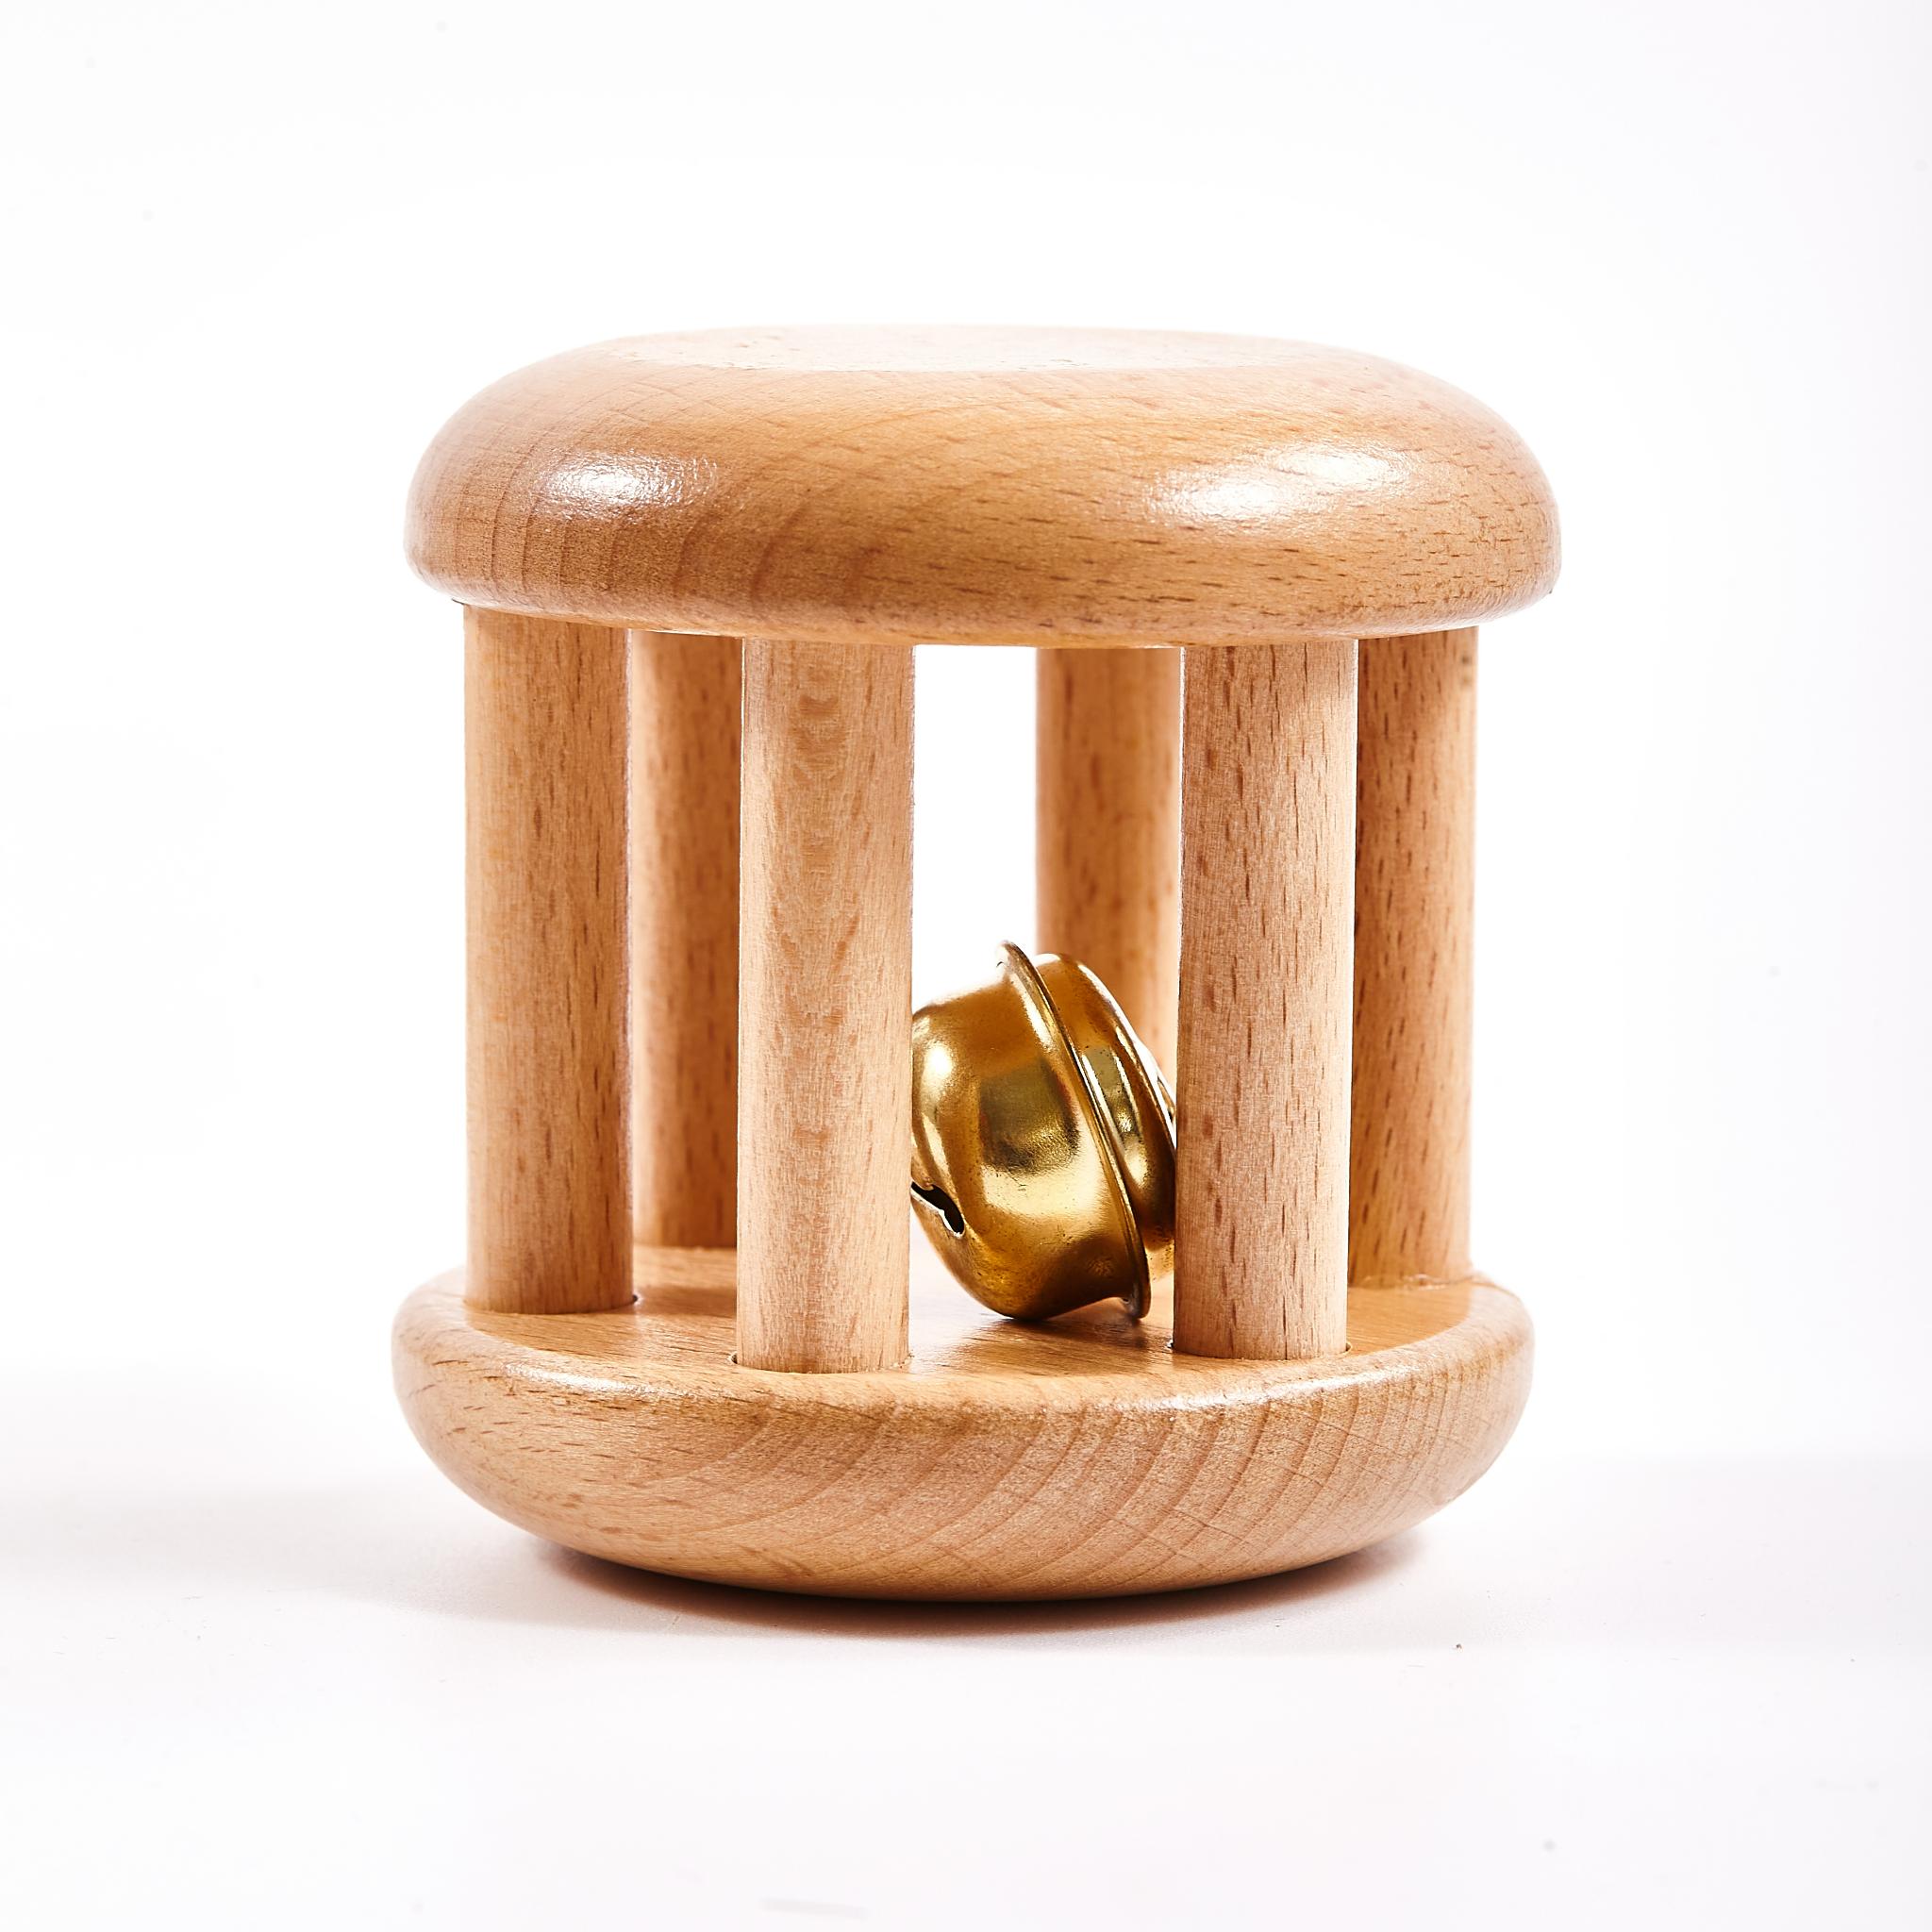 Montessori rattle with bell